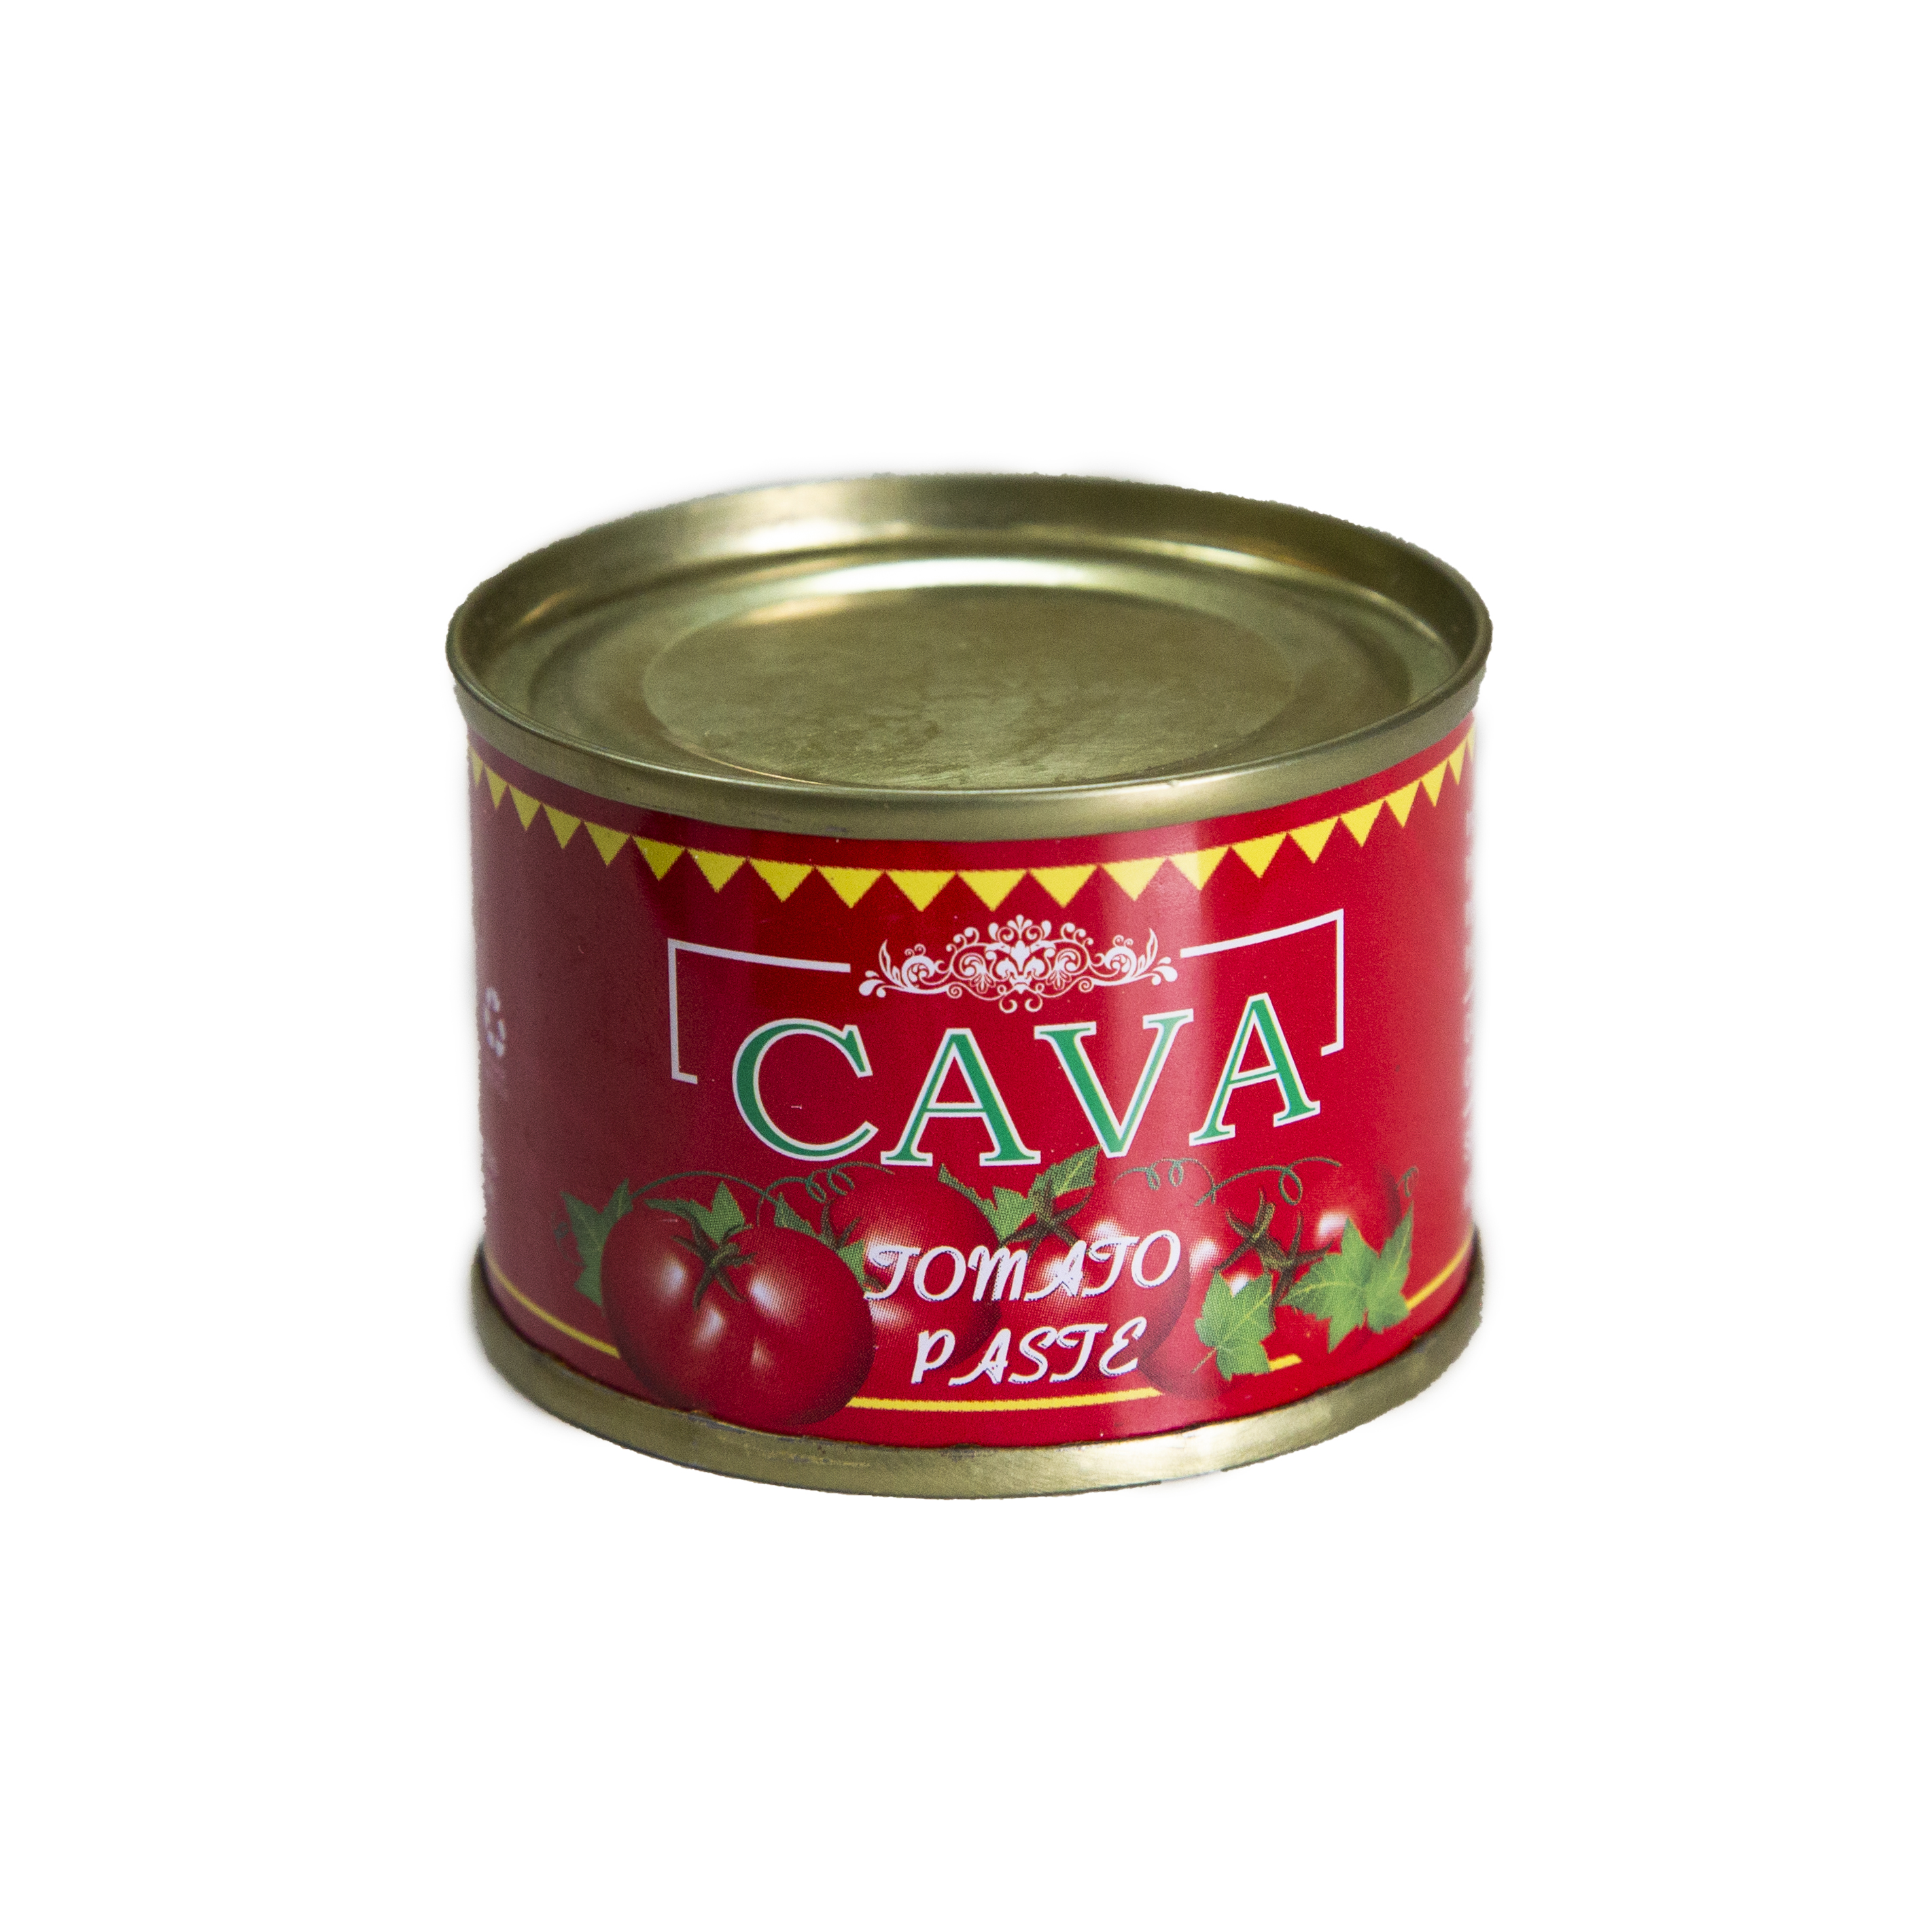 tomato paste canned 70g high quality tomato paste